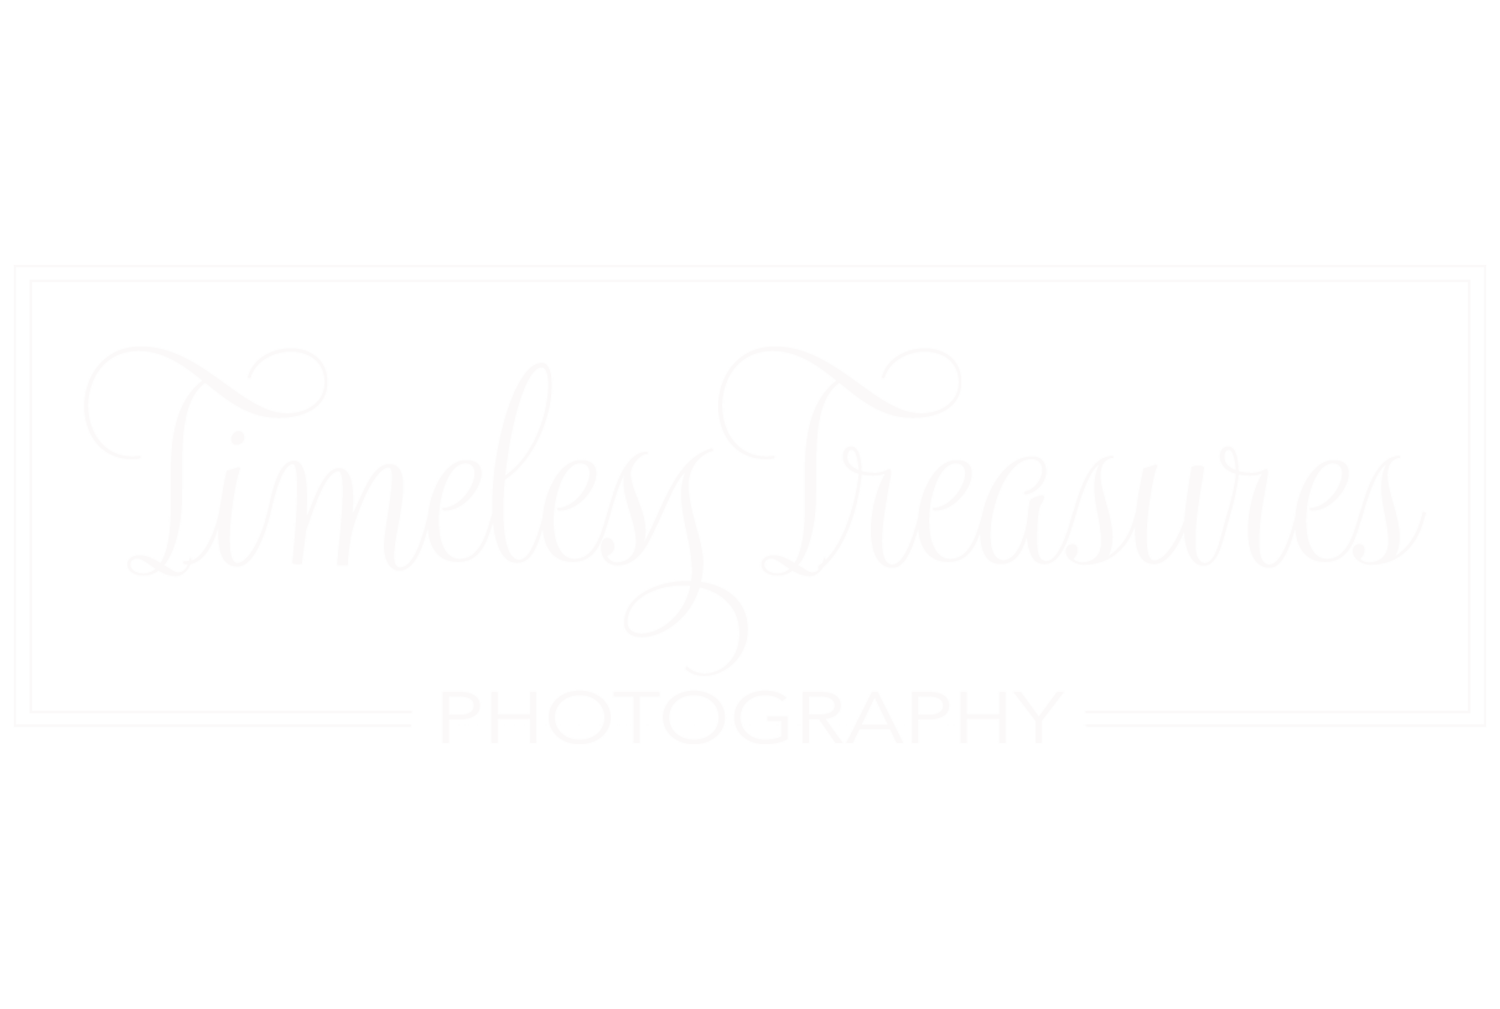 Timeless Treasures Photography